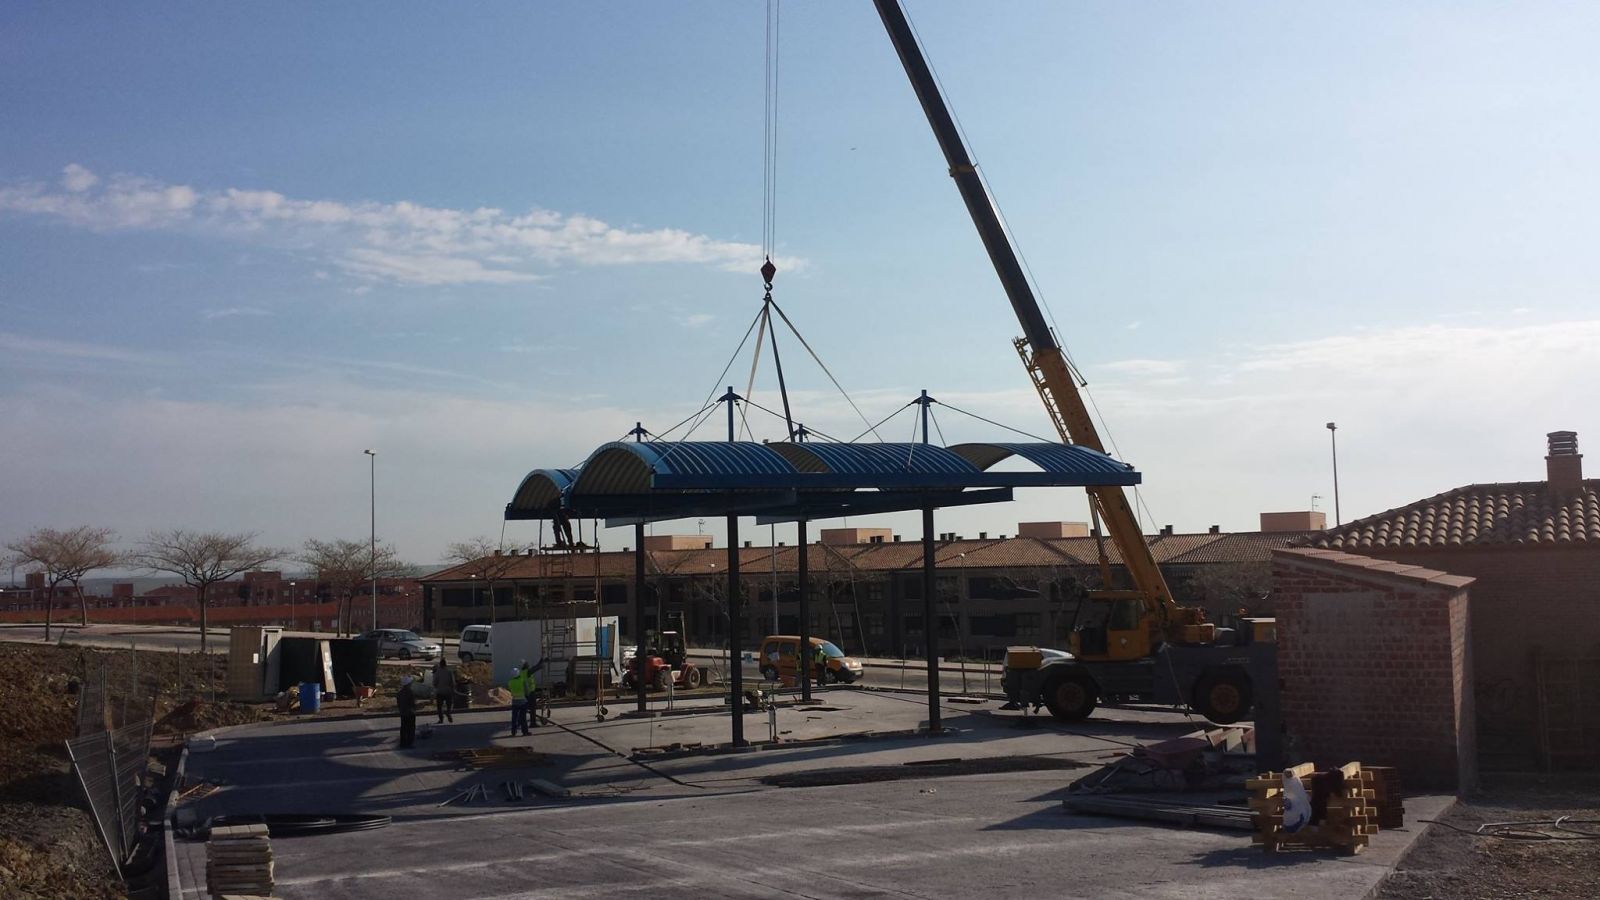 The self-supporting curved system INCO 70.4 has been chosen to protect from the weather the Petrogold petrol station in Cceres.